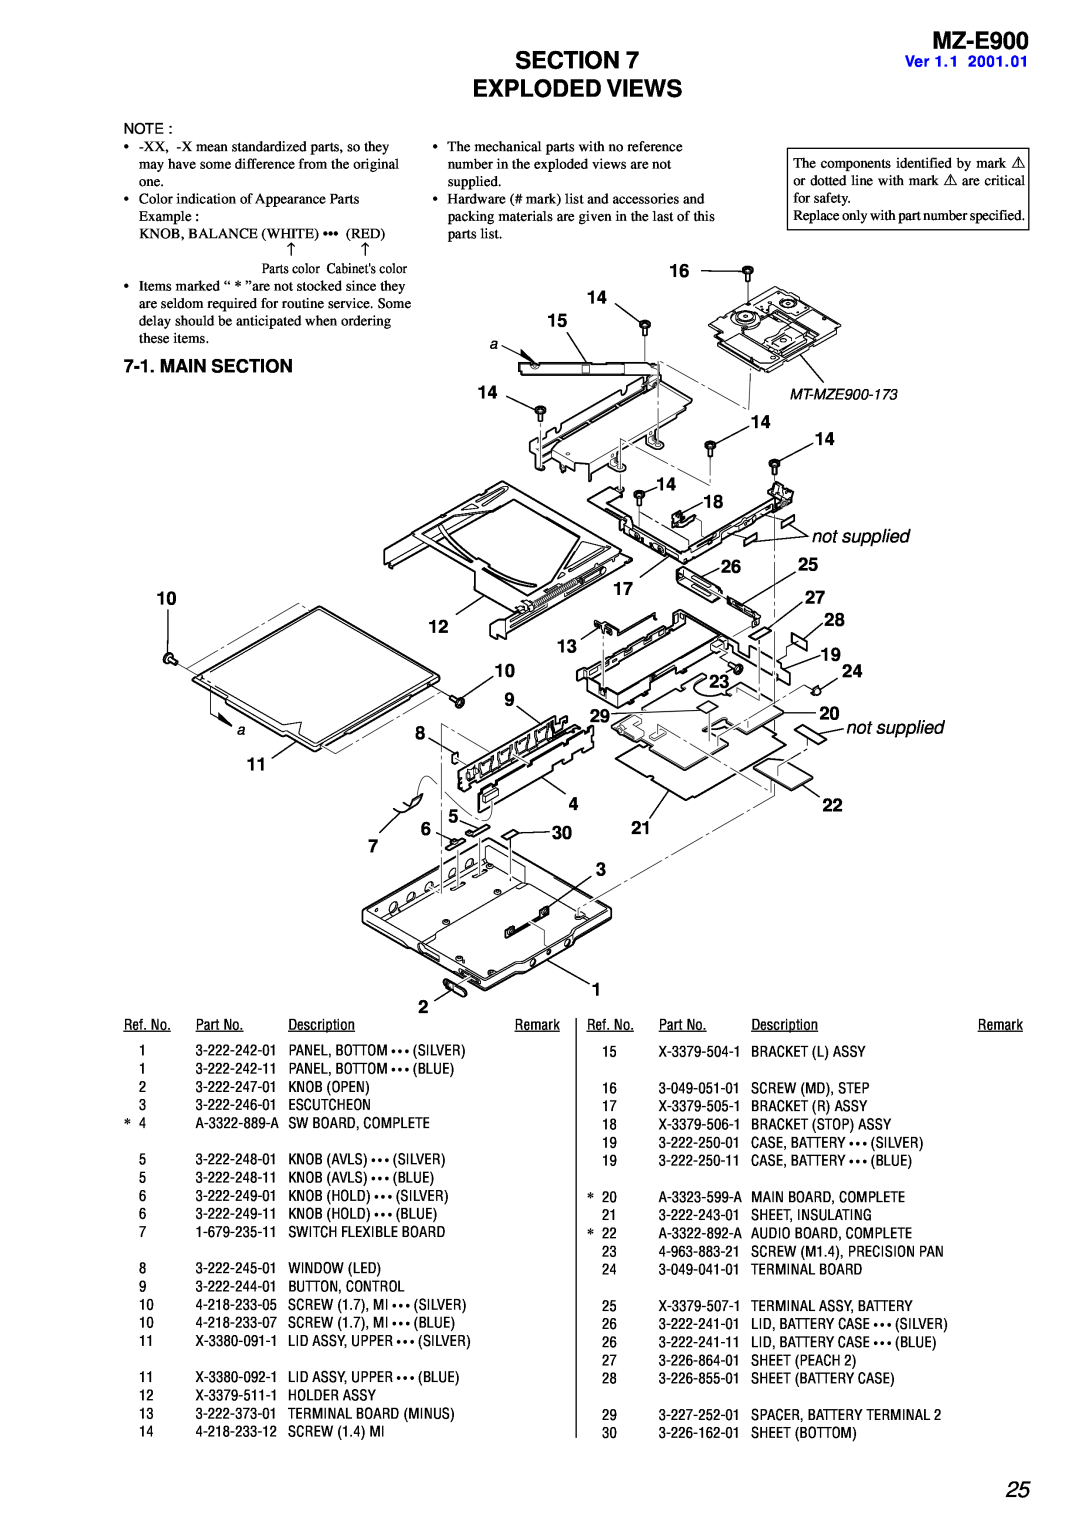 Sony MZ-E900 specifications Exploded Views, Main Section, 16 14, Ver 